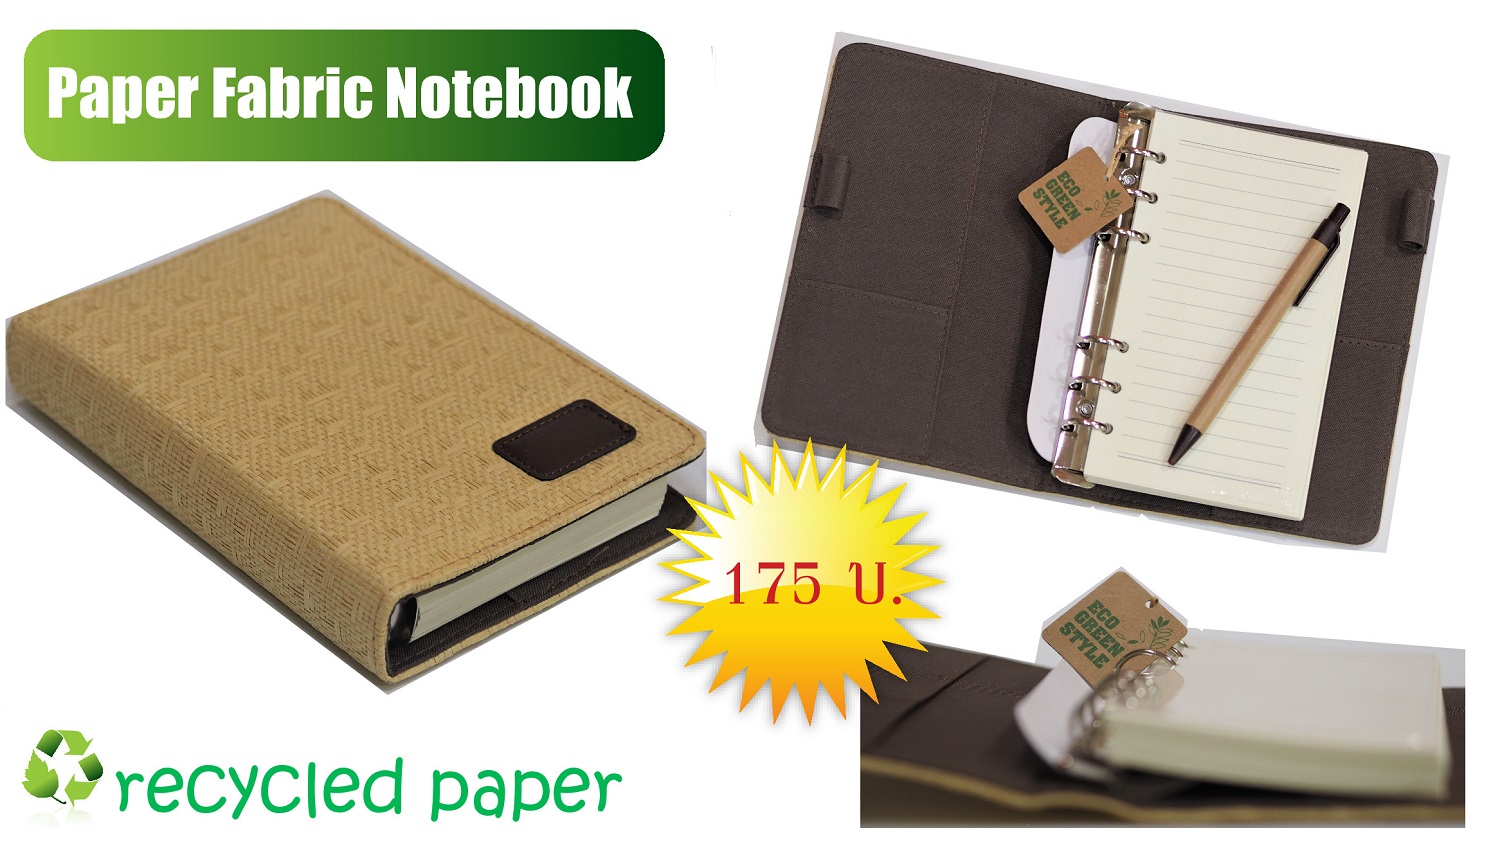 Paper Fabric Notebook